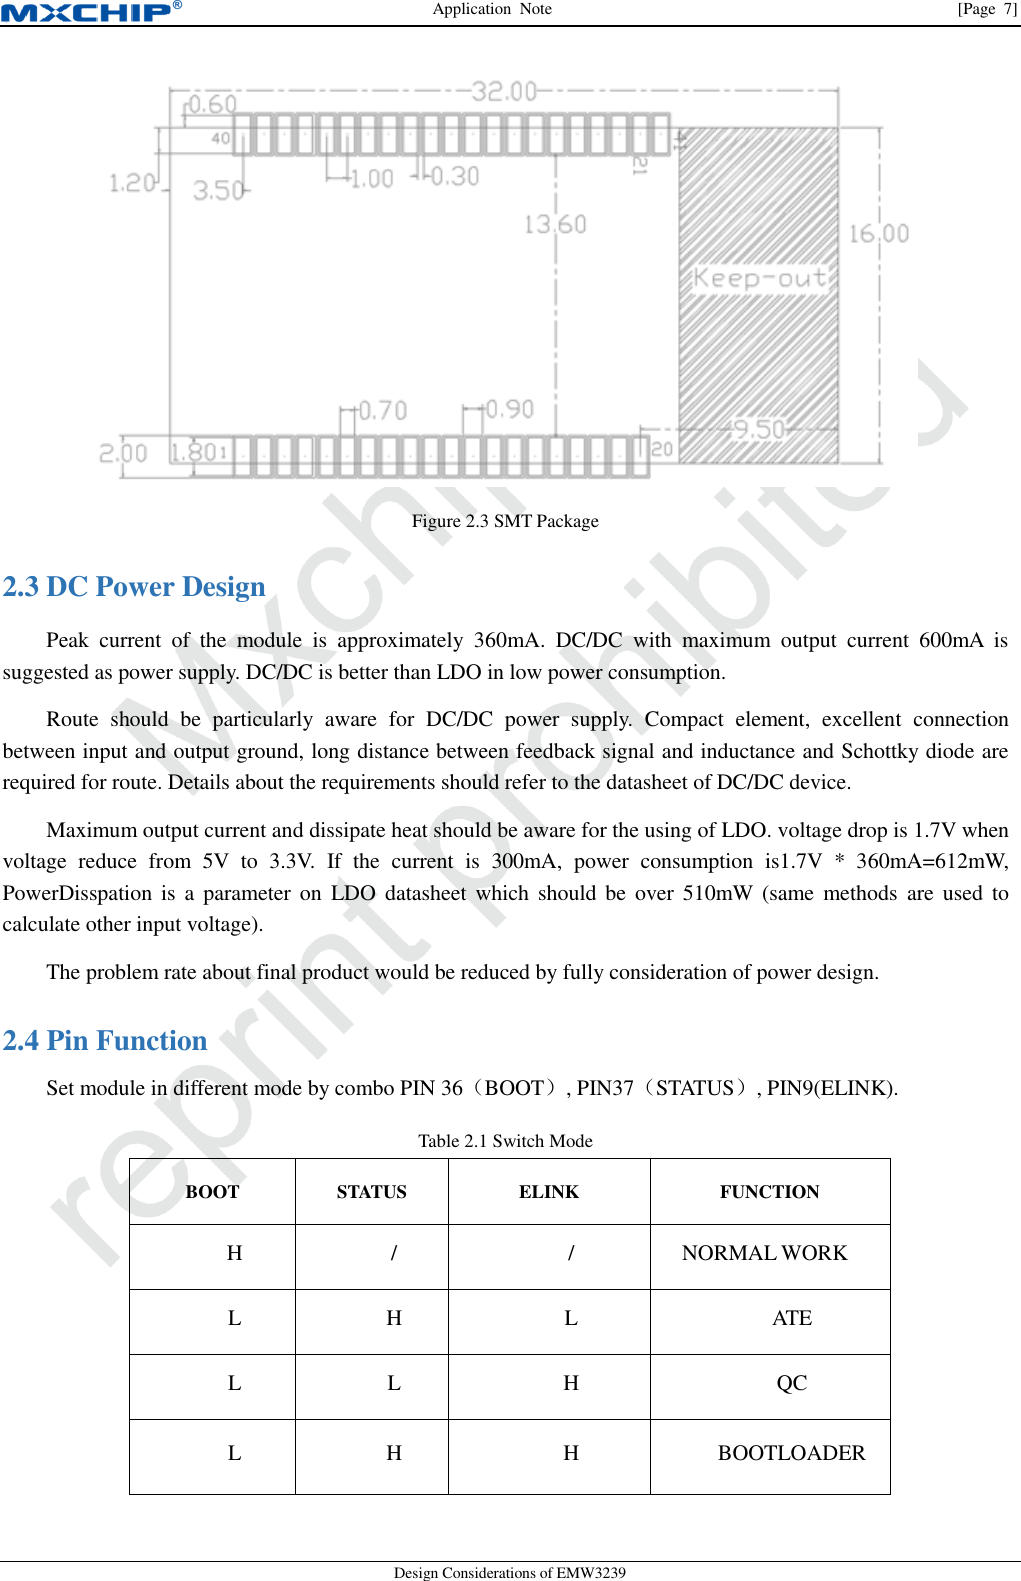 Application  Note                [Page  7] Design Considerations of EMW3239  Figure 2.3 SMT Package  DC Power Design 2.3Peak  current  of  the  module  is  approximately  360mA.  DC/DC  with  maximum  output  current  600mA  is suggested as power supply. DC/DC is better than LDO in low power consumption. Route  should  be  particularly  aware  for  DC/DC  power  supply.  Compact  element,  excellent  connection between input and output ground, long distance between feedback signal and inductance and Schottky diode are required for route. Details about the requirements should refer to the datasheet of DC/DC device. Maximum output current and dissipate heat should be aware for the using of LDO. voltage drop is 1.7V when voltage  reduce  from  5V  to  3.3V.  If  the  current  is  300mA,  power  consumption  is1.7V  *  360mA=612mW, PowerDisspation  is a parameter  on  LDO  datasheet which  should be over  510mW  (same  methods  are  used  to calculate other input voltage). The problem rate about final product would be reduced by fully consideration of power design.  Pin Function 2.4Set module in different mode by combo PIN 36（BOOT）, PIN37（STATUS）, PIN9(ELINK). Table 2.1 Switch Mode BOOT STATUS ELINK FUNCTION H / / NORMAL WORK L H L ATE L L H QC L H H BOOTLOADER 